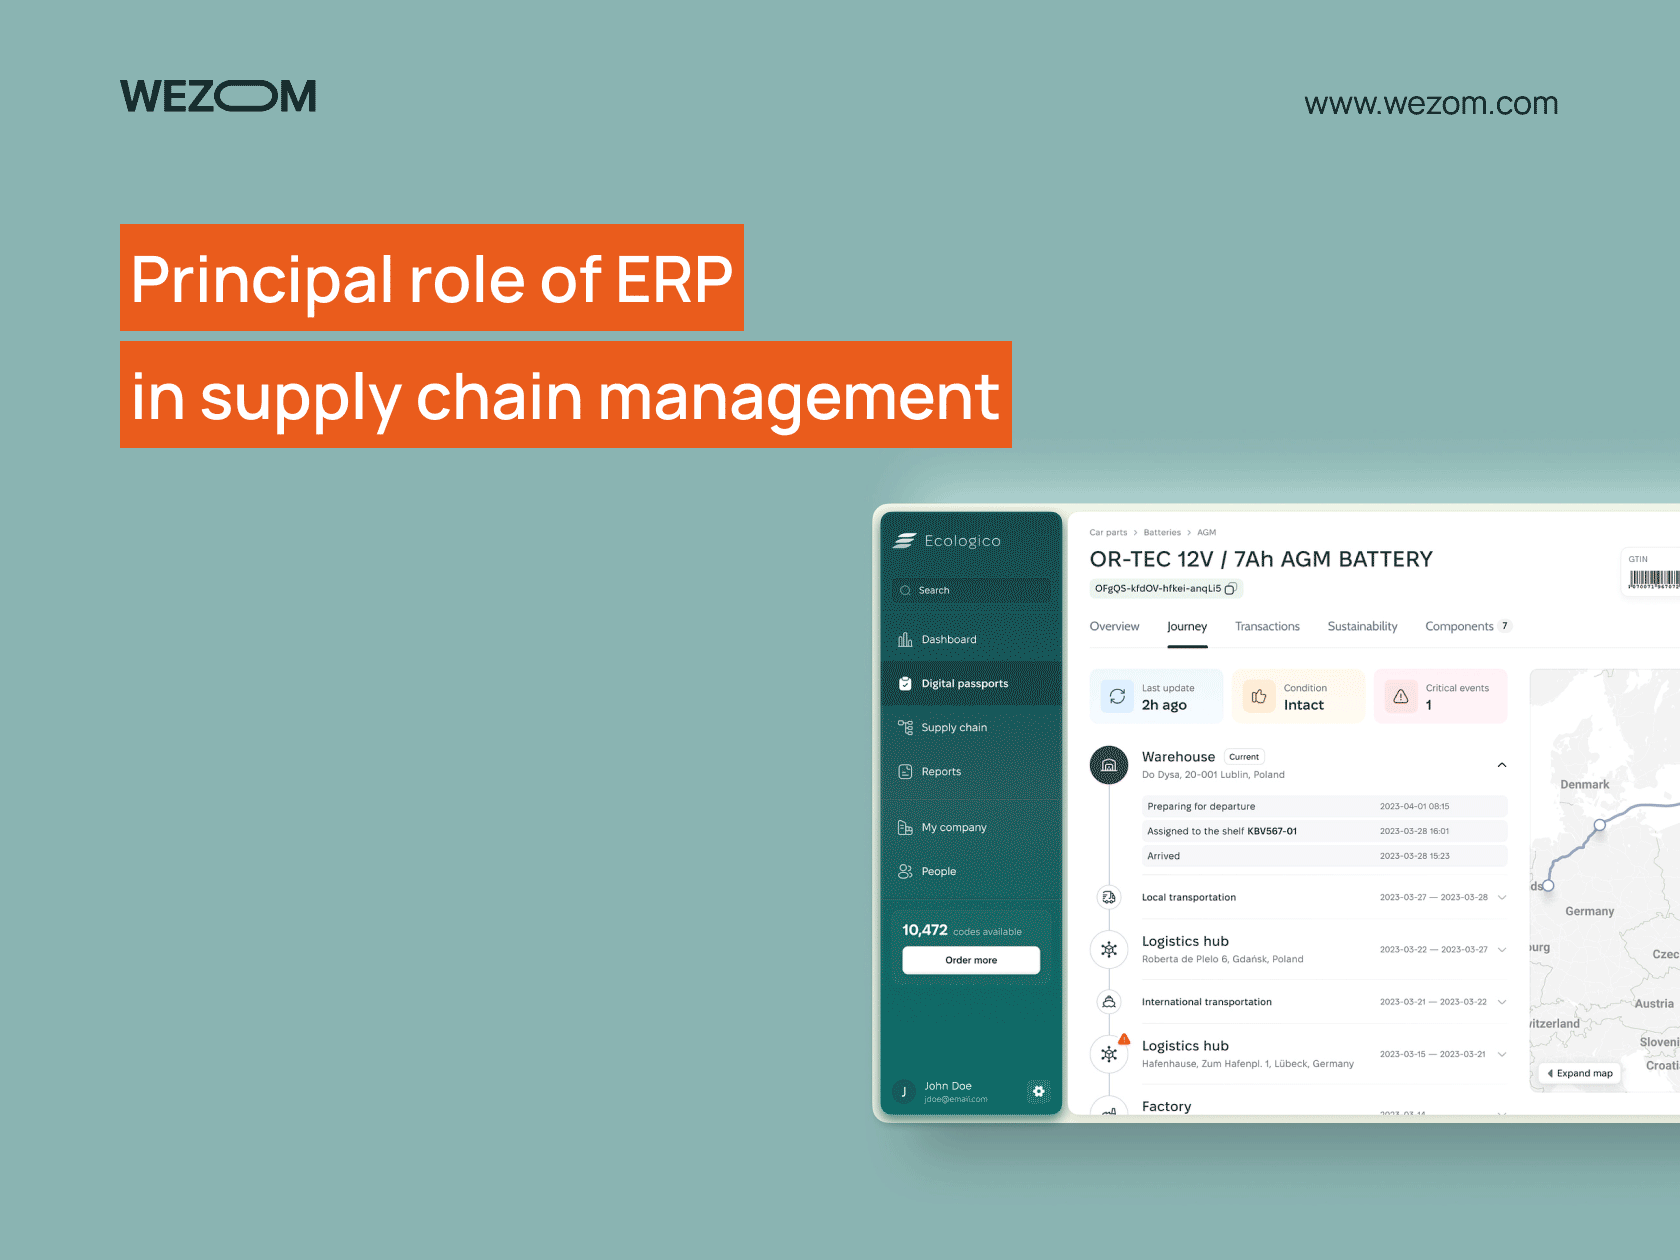 Principal role of ERP in supply chain management